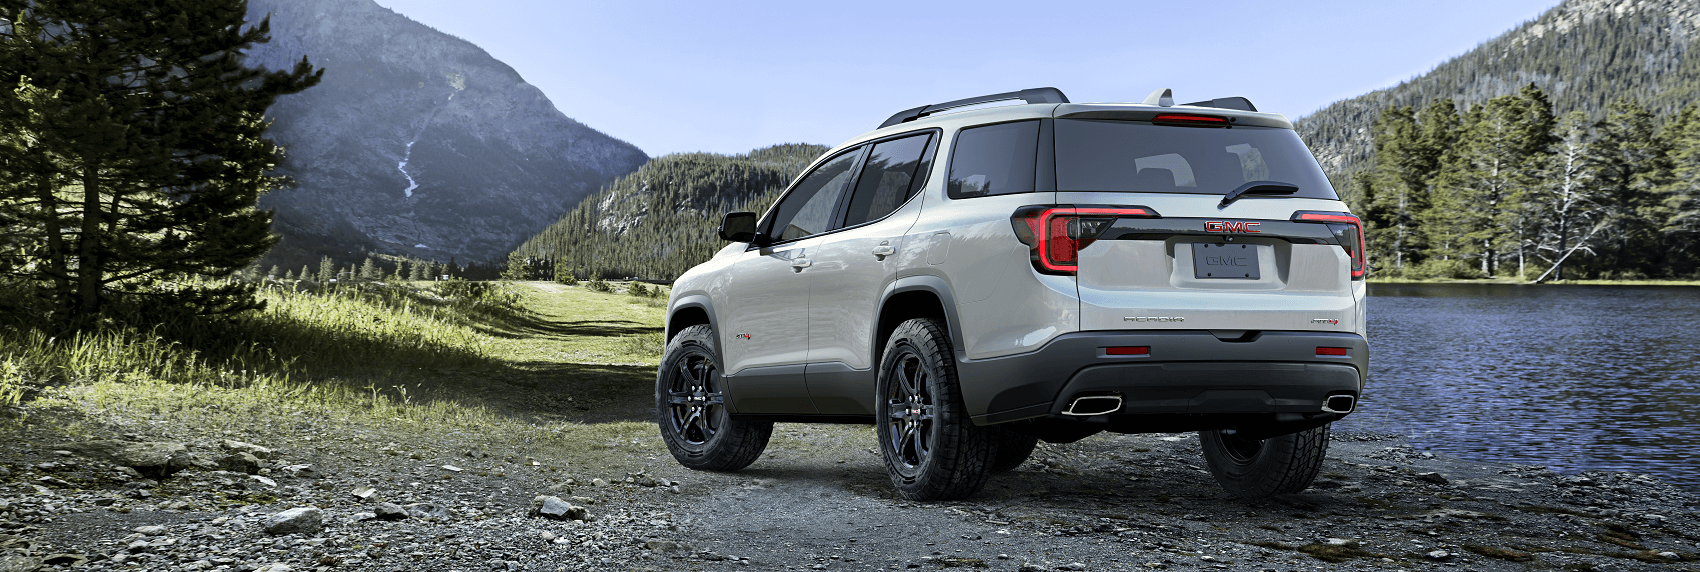 GMC Acadia for Sale Noblesville IN